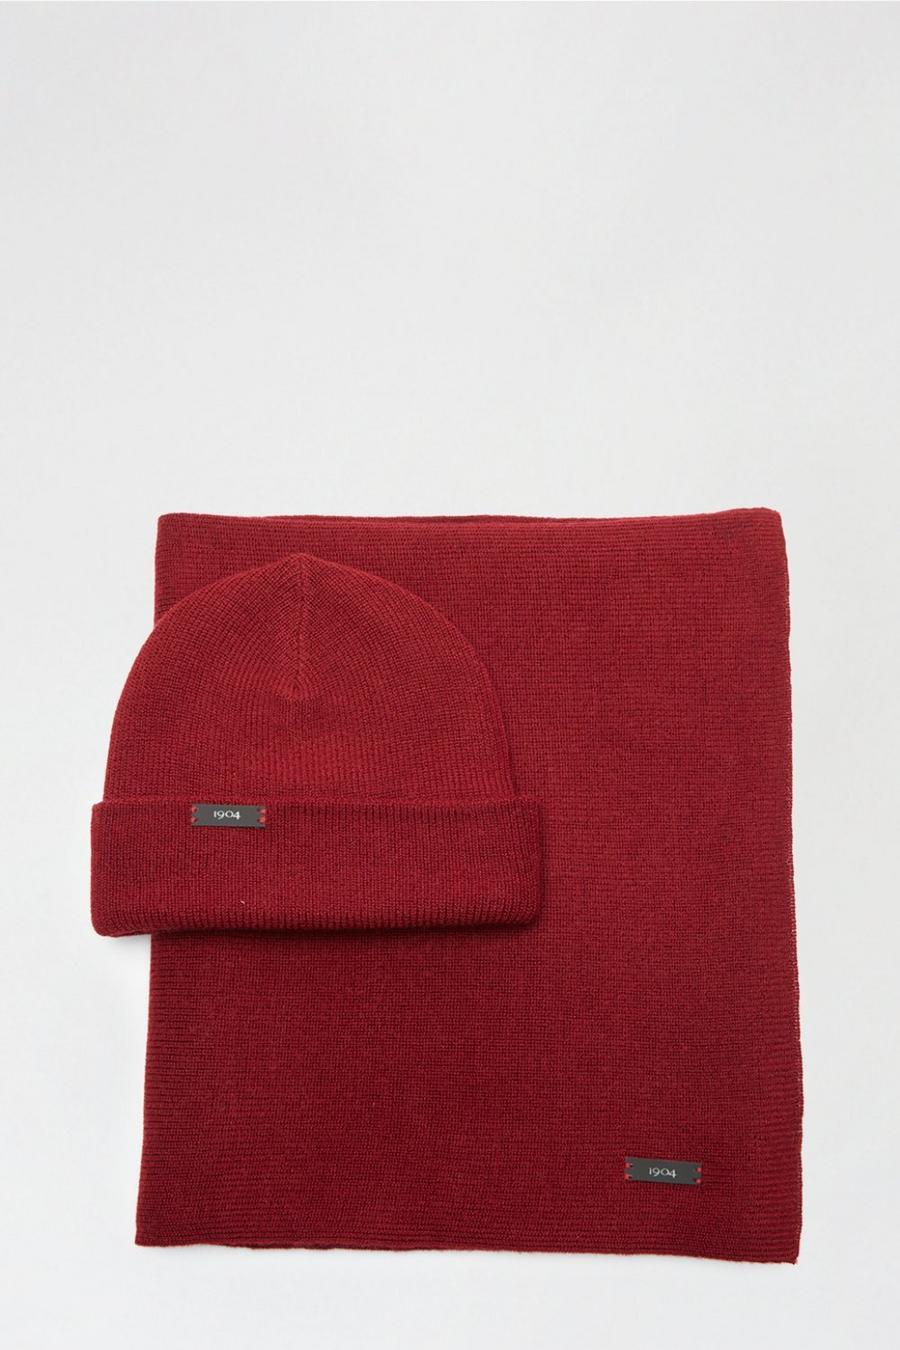 1904 Red Merino Blend Beanie And Scarf Gift Set